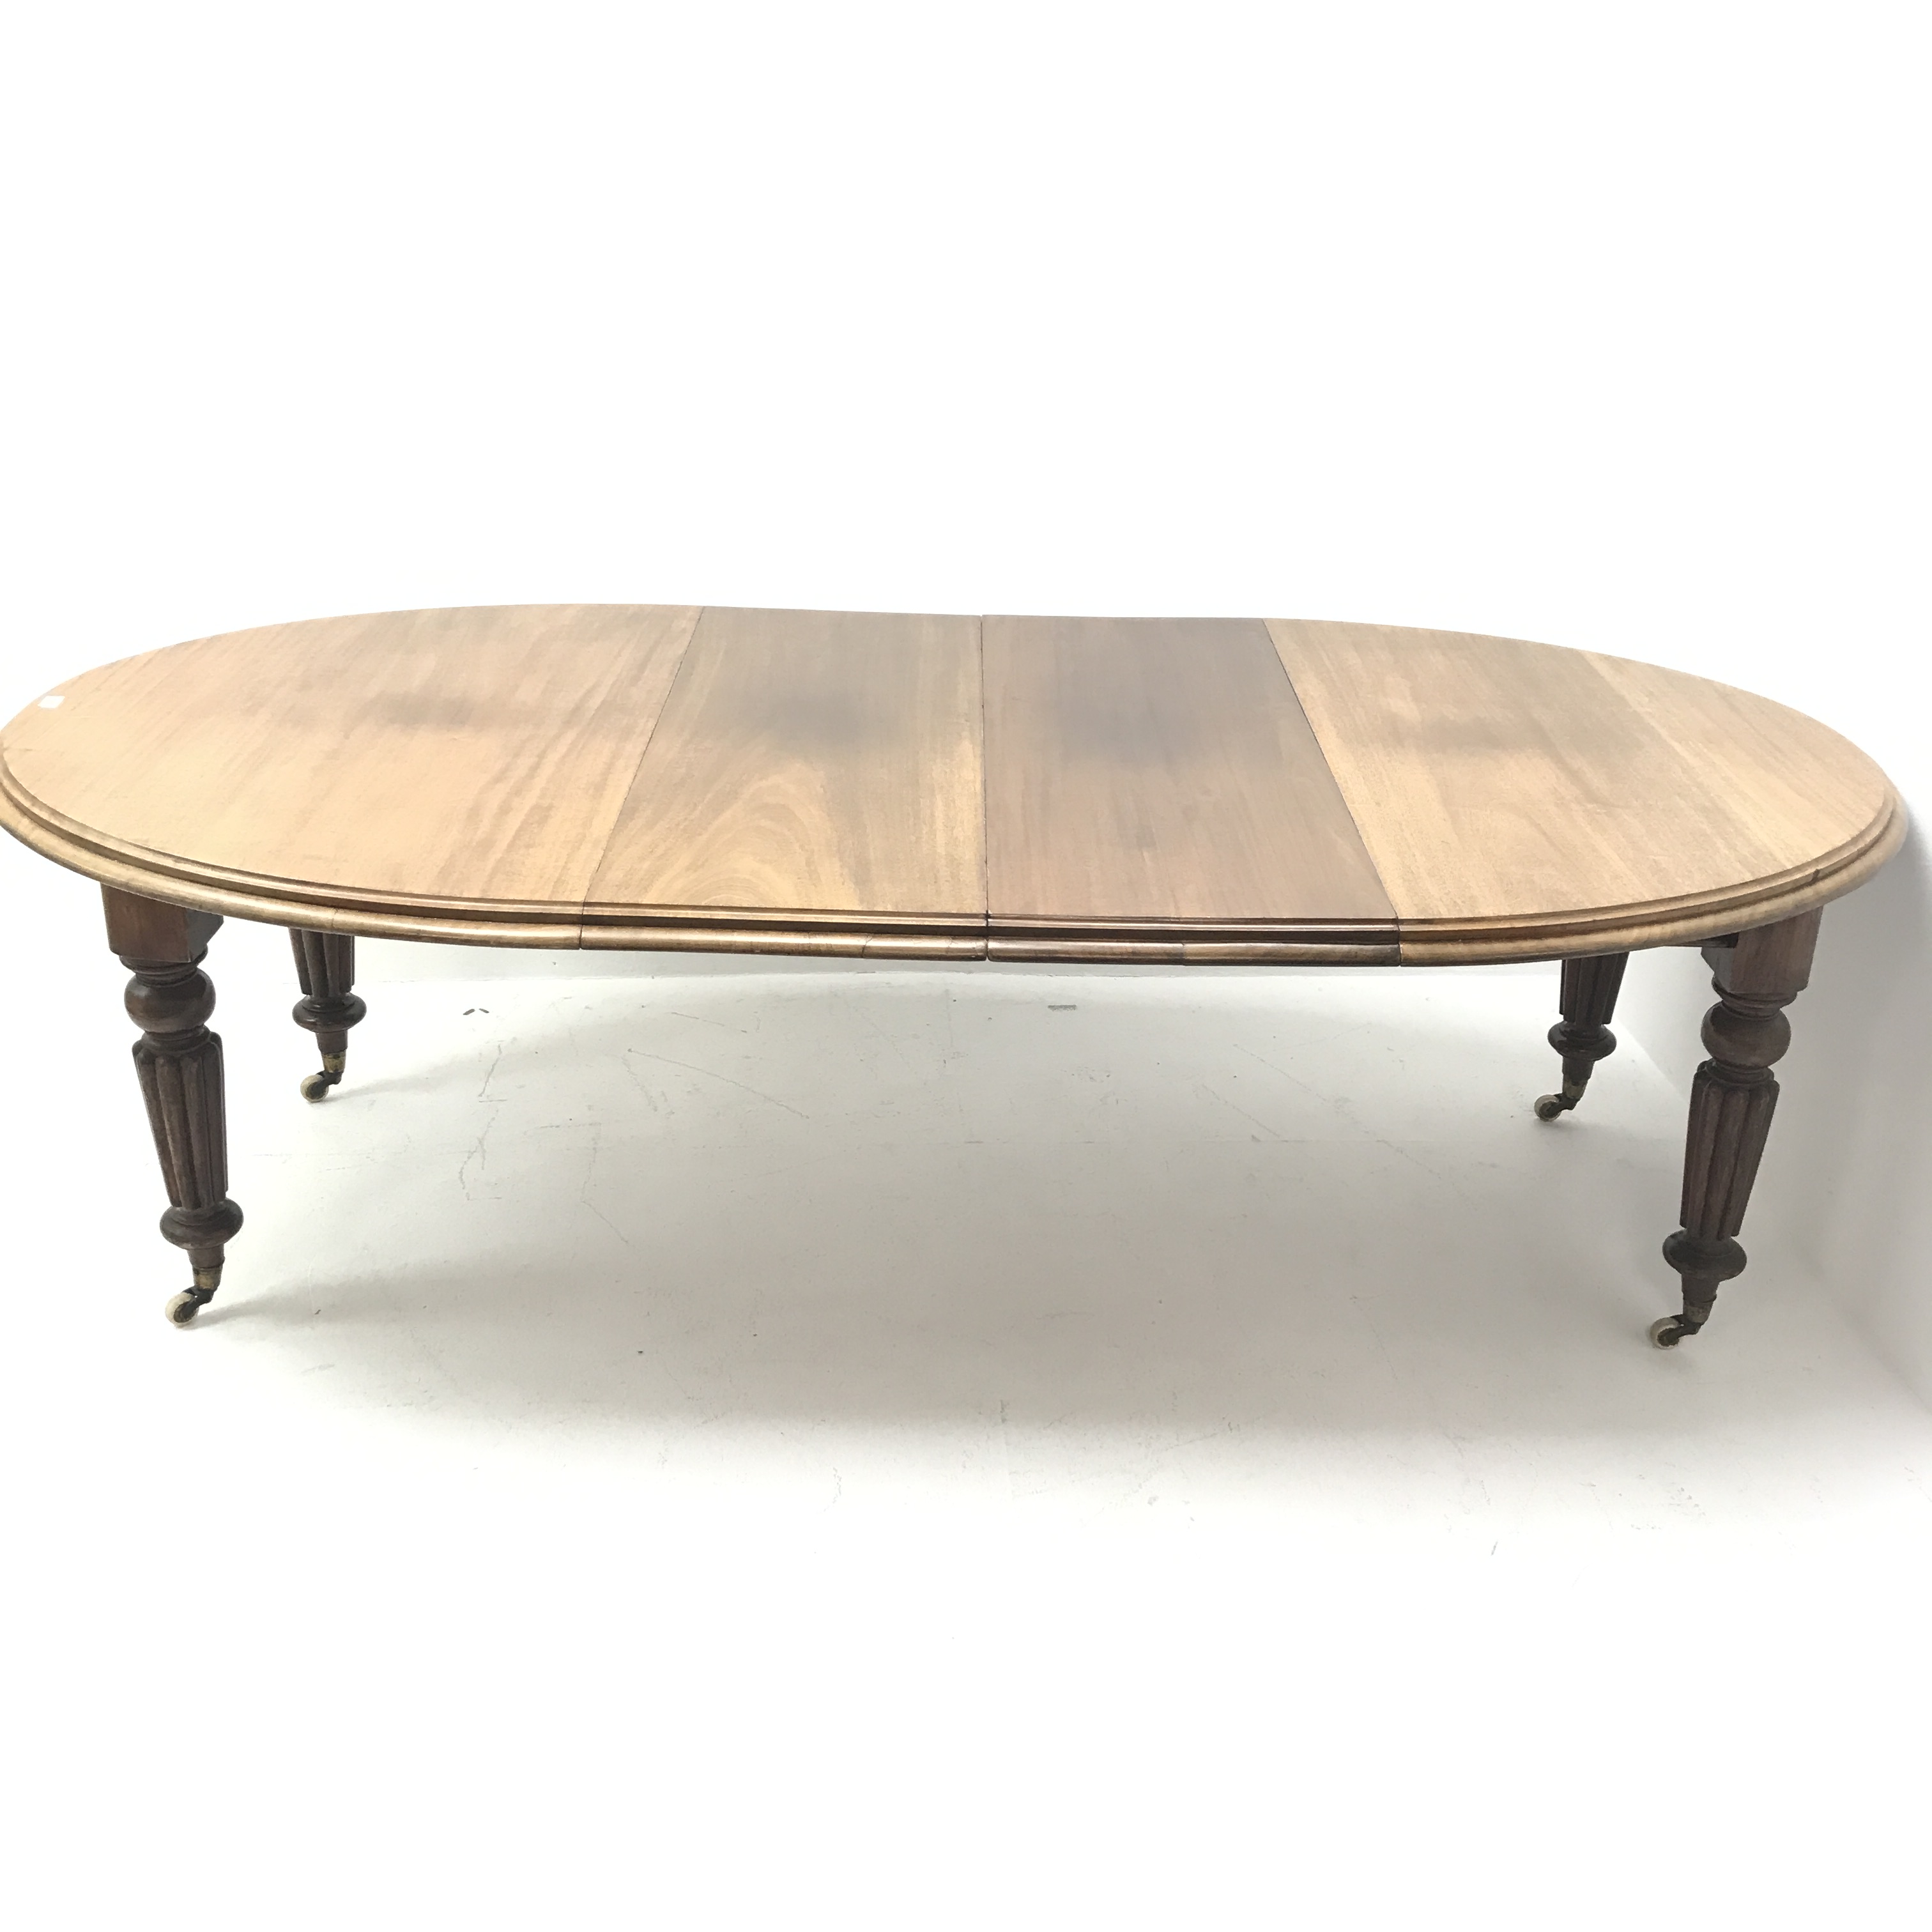 Victorian mahogany telescopic extending dining table with two leaves, turned supports, W217cm, H73cm - Image 6 of 8